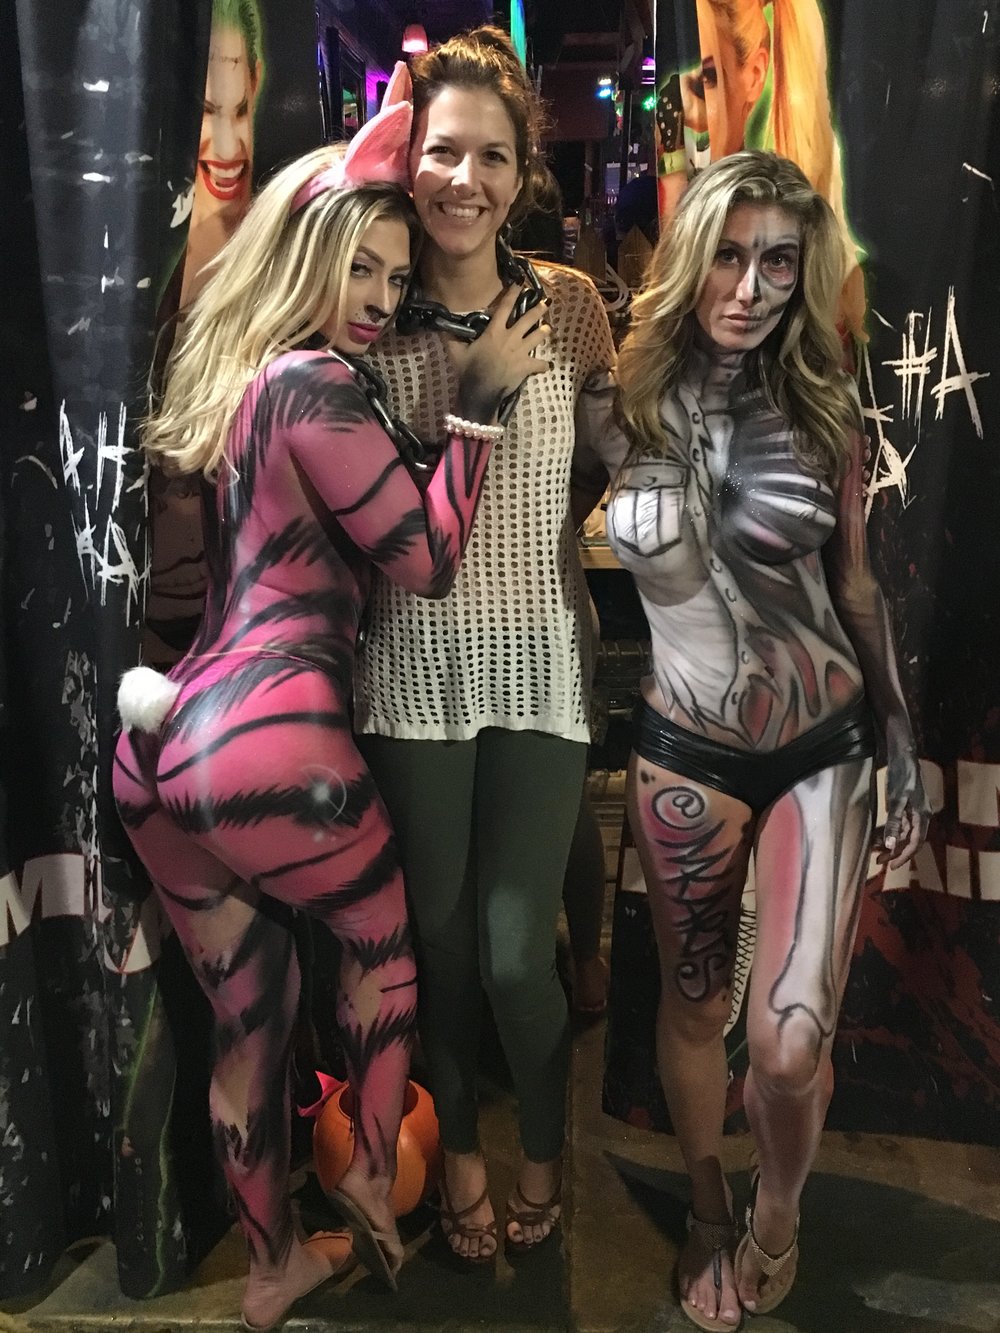  Alessandra Torre with two body paint models - at fantasy fest 2016 in key west 